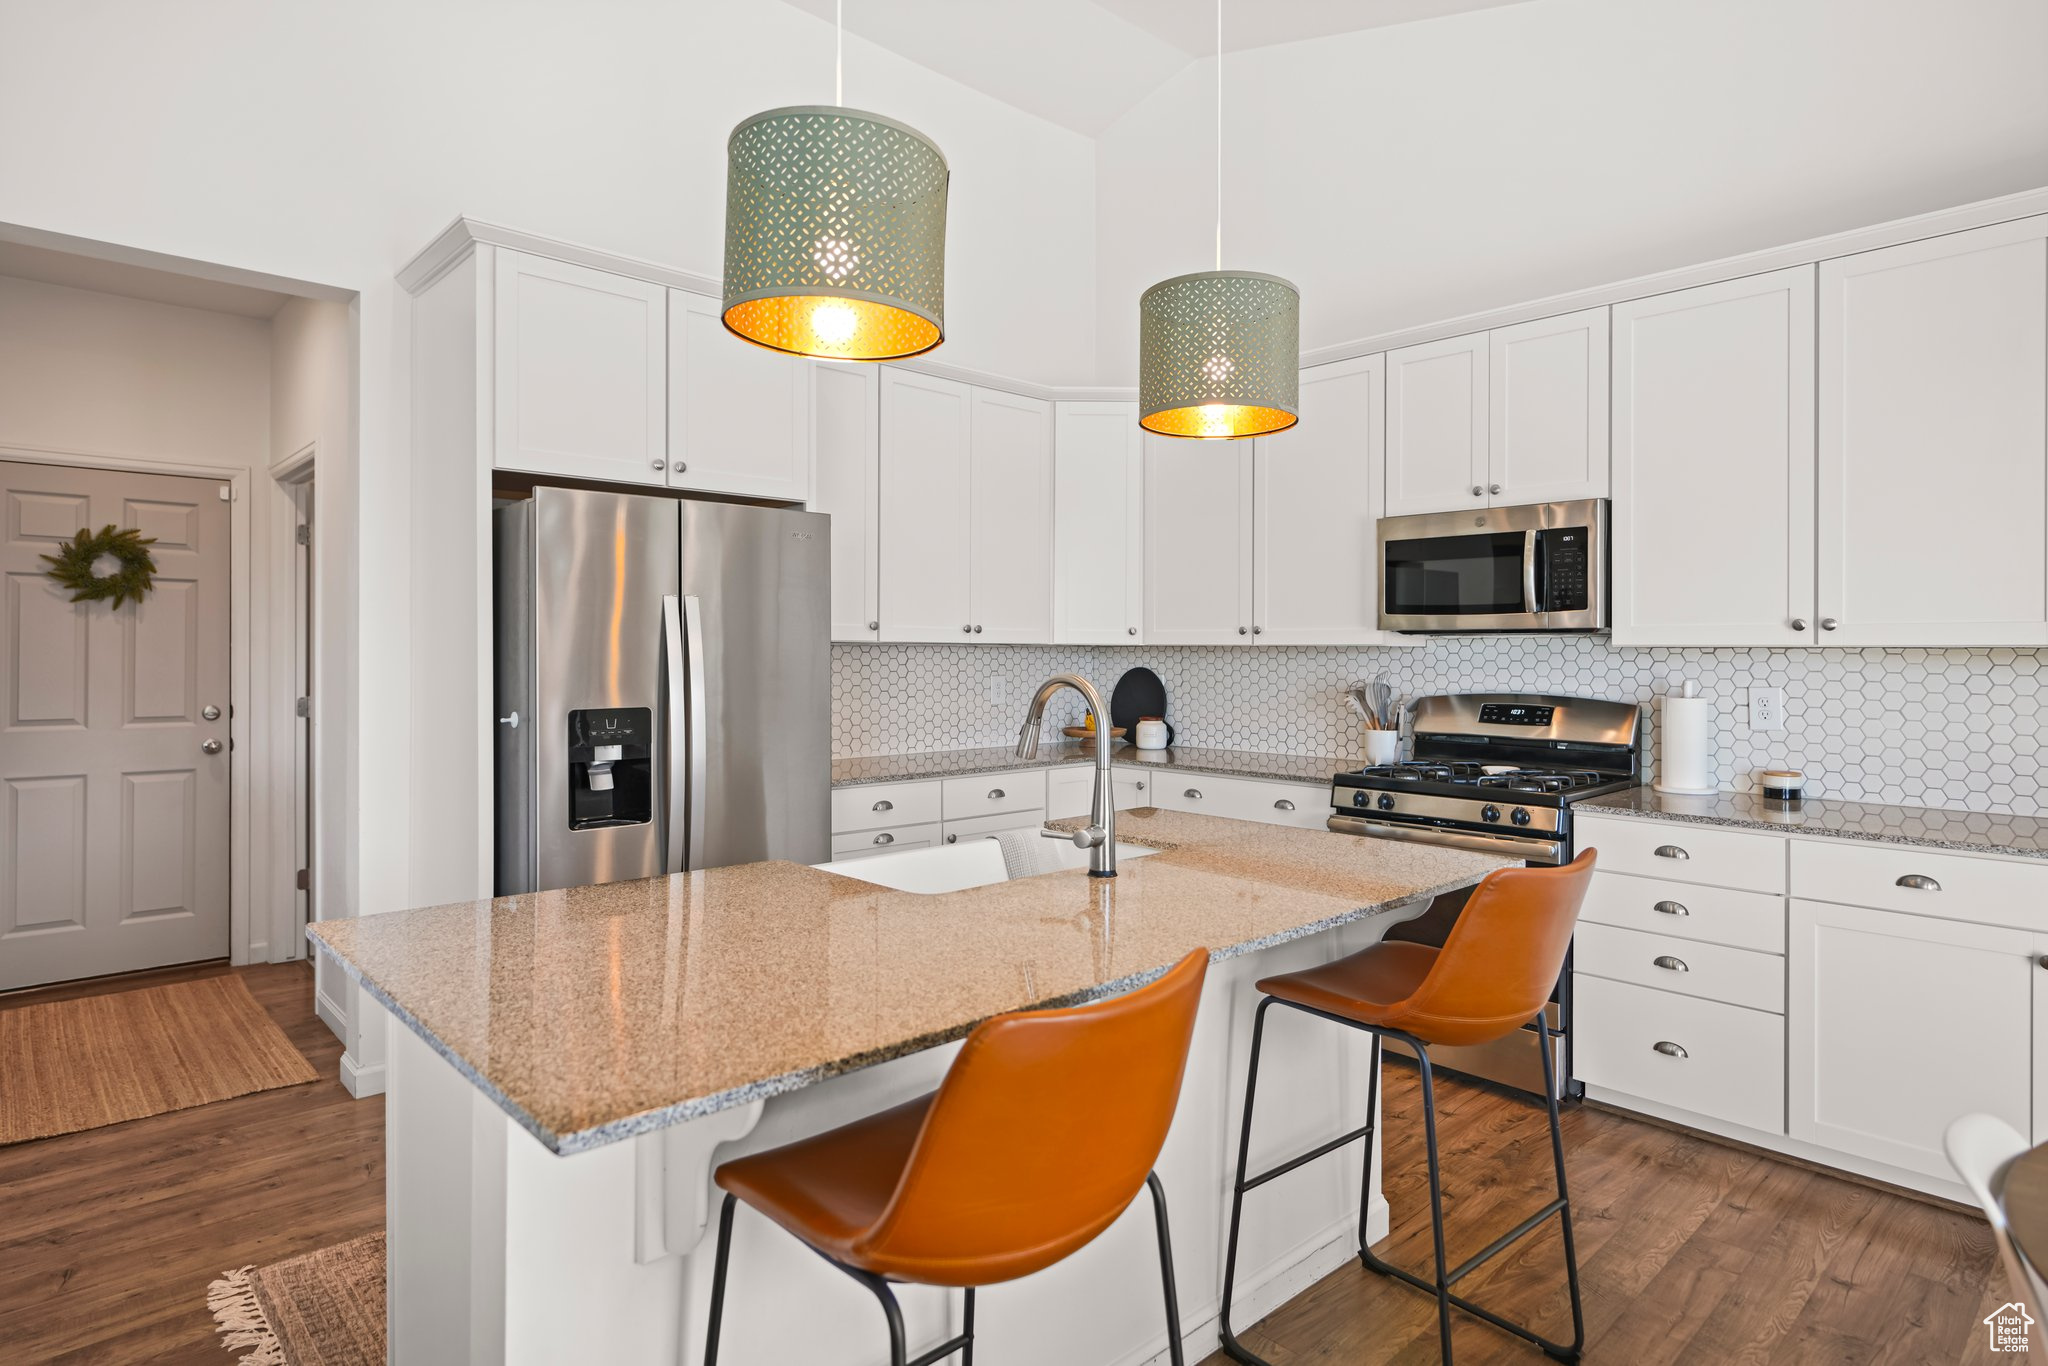 Kitchen featuring pendant lighting, backsplash, dark hardwood / wood-style floors, appliances with stainless steel finishes, and a kitchen island with sink